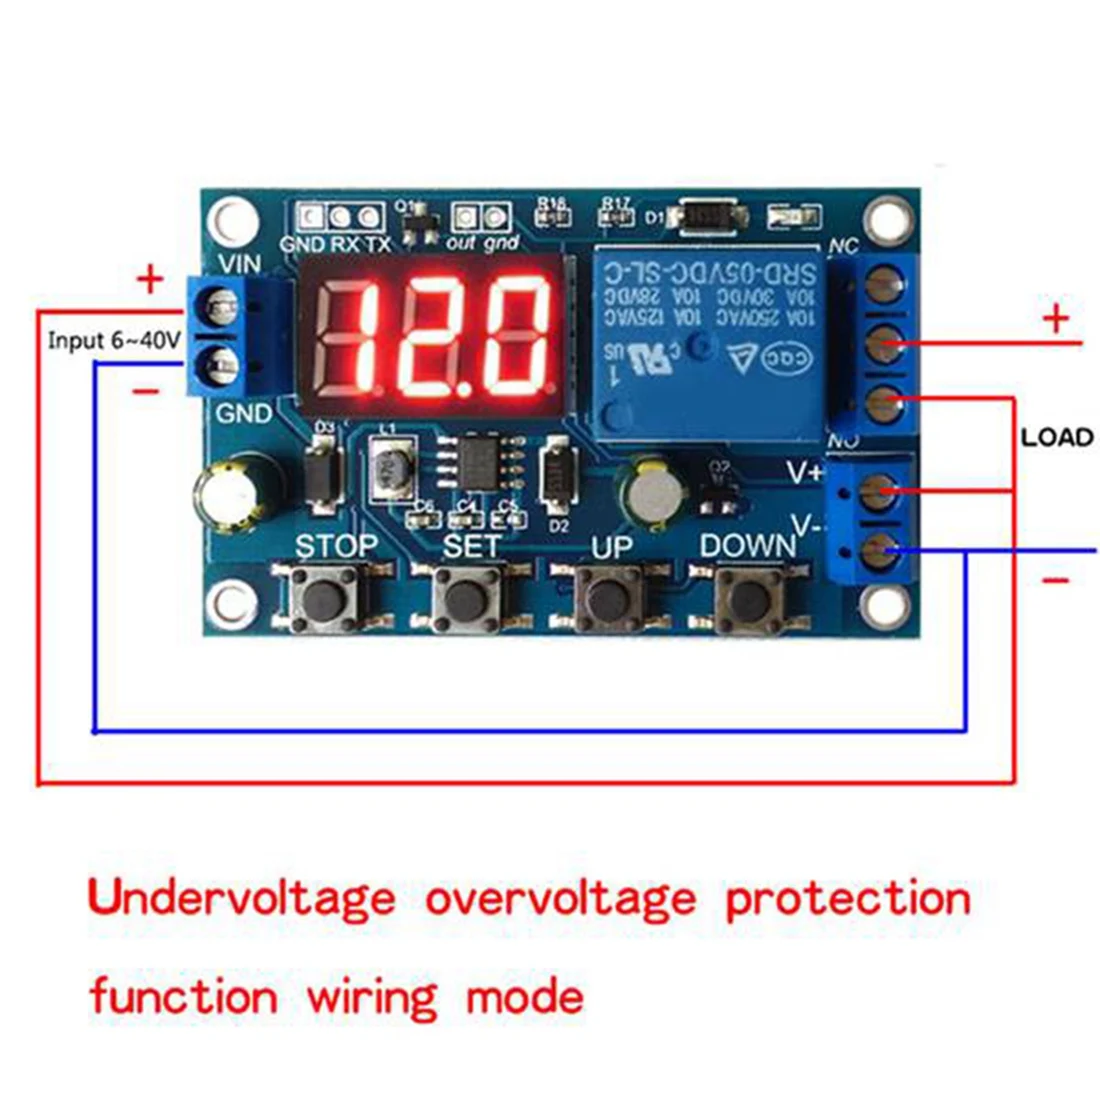 

2PCS DC 6-40V Battery Charger Discharger Control Switch Undervoltage Overvoltage Protection Board Auto Cut Off